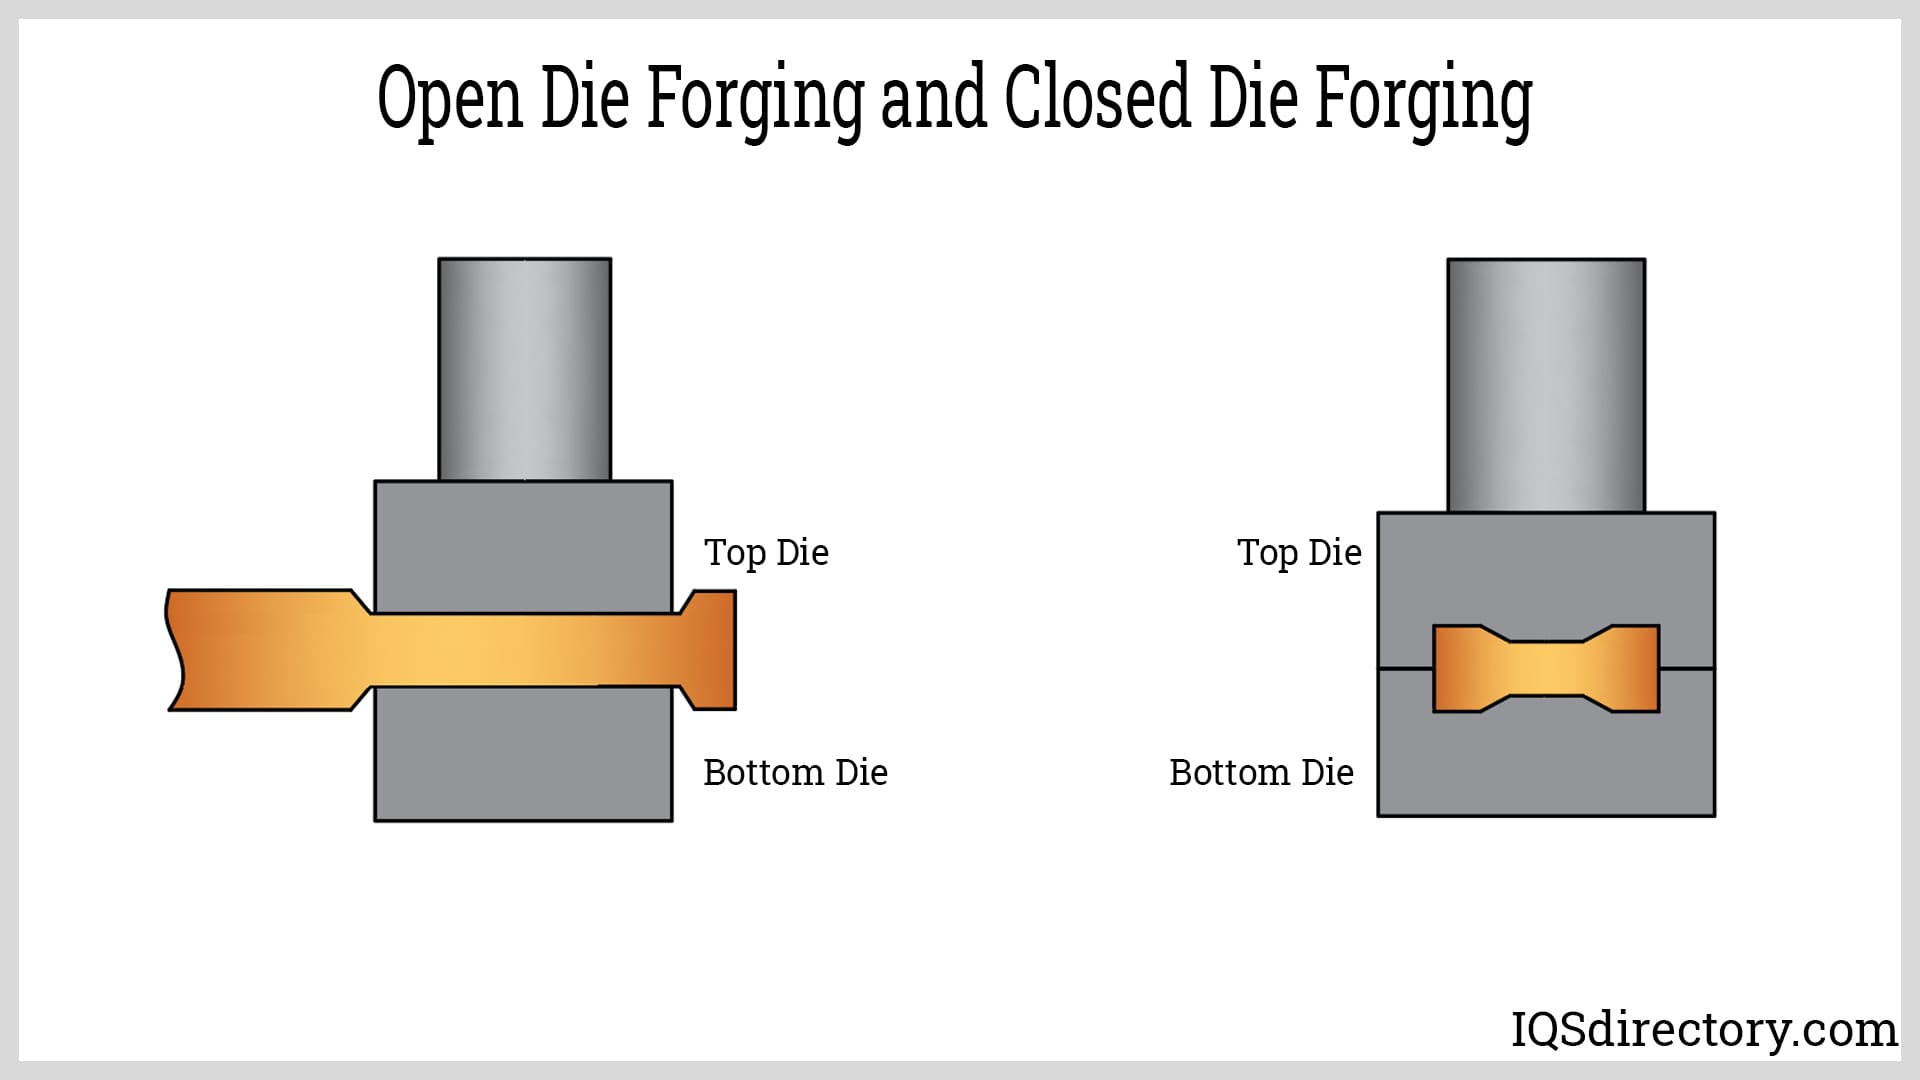 Open Die Forging and Closed Die Forging